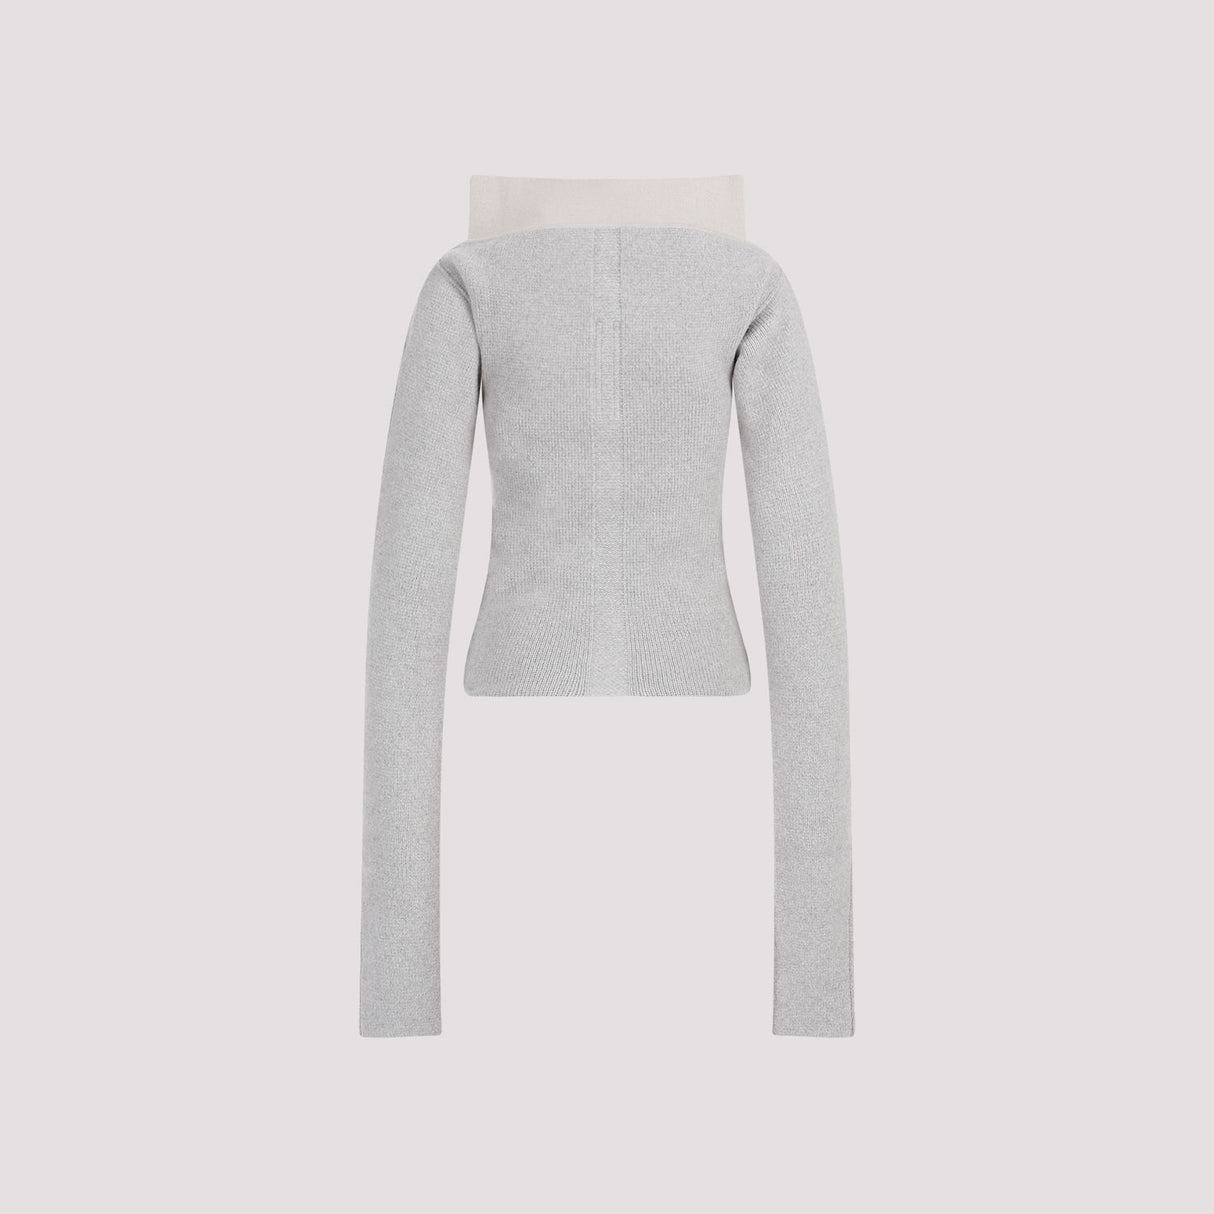 RICK OWENS Cowl Pullover in Nude & Neutrals for Women - FW23 Cashmere Knitwear